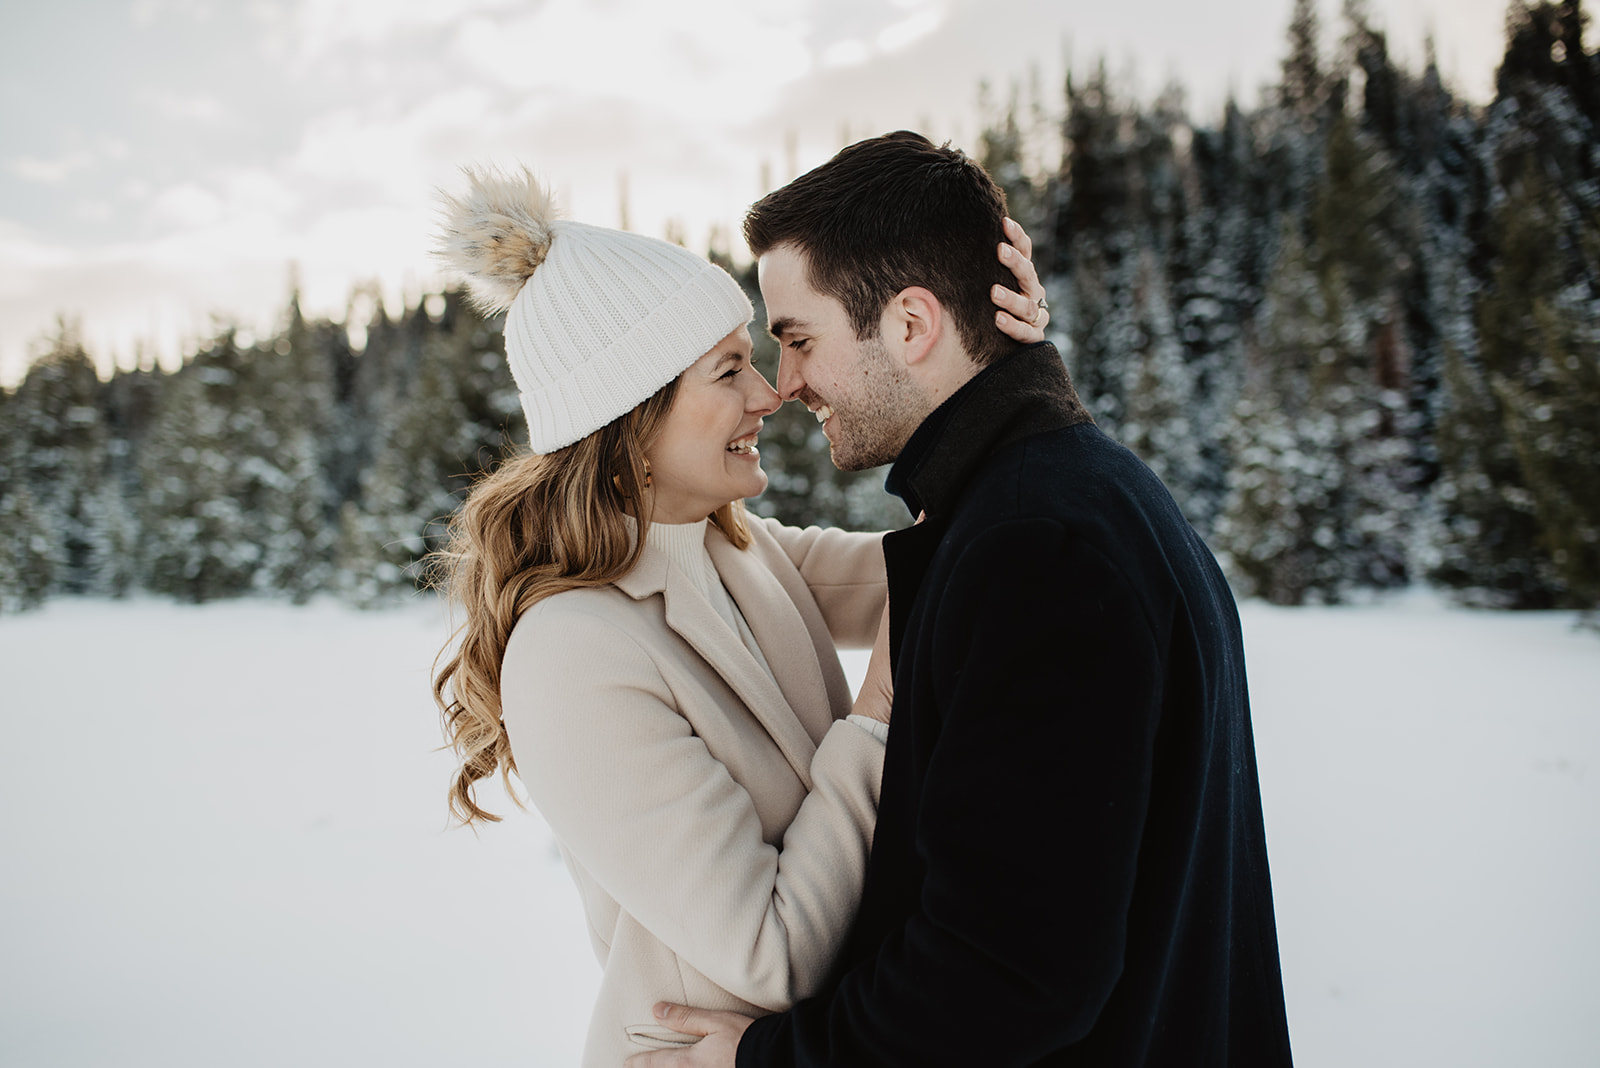 winter engagement session in Jackson Hole with snow surrounding the couple and beautiful pine trees covered in snow with the couple embracing each other